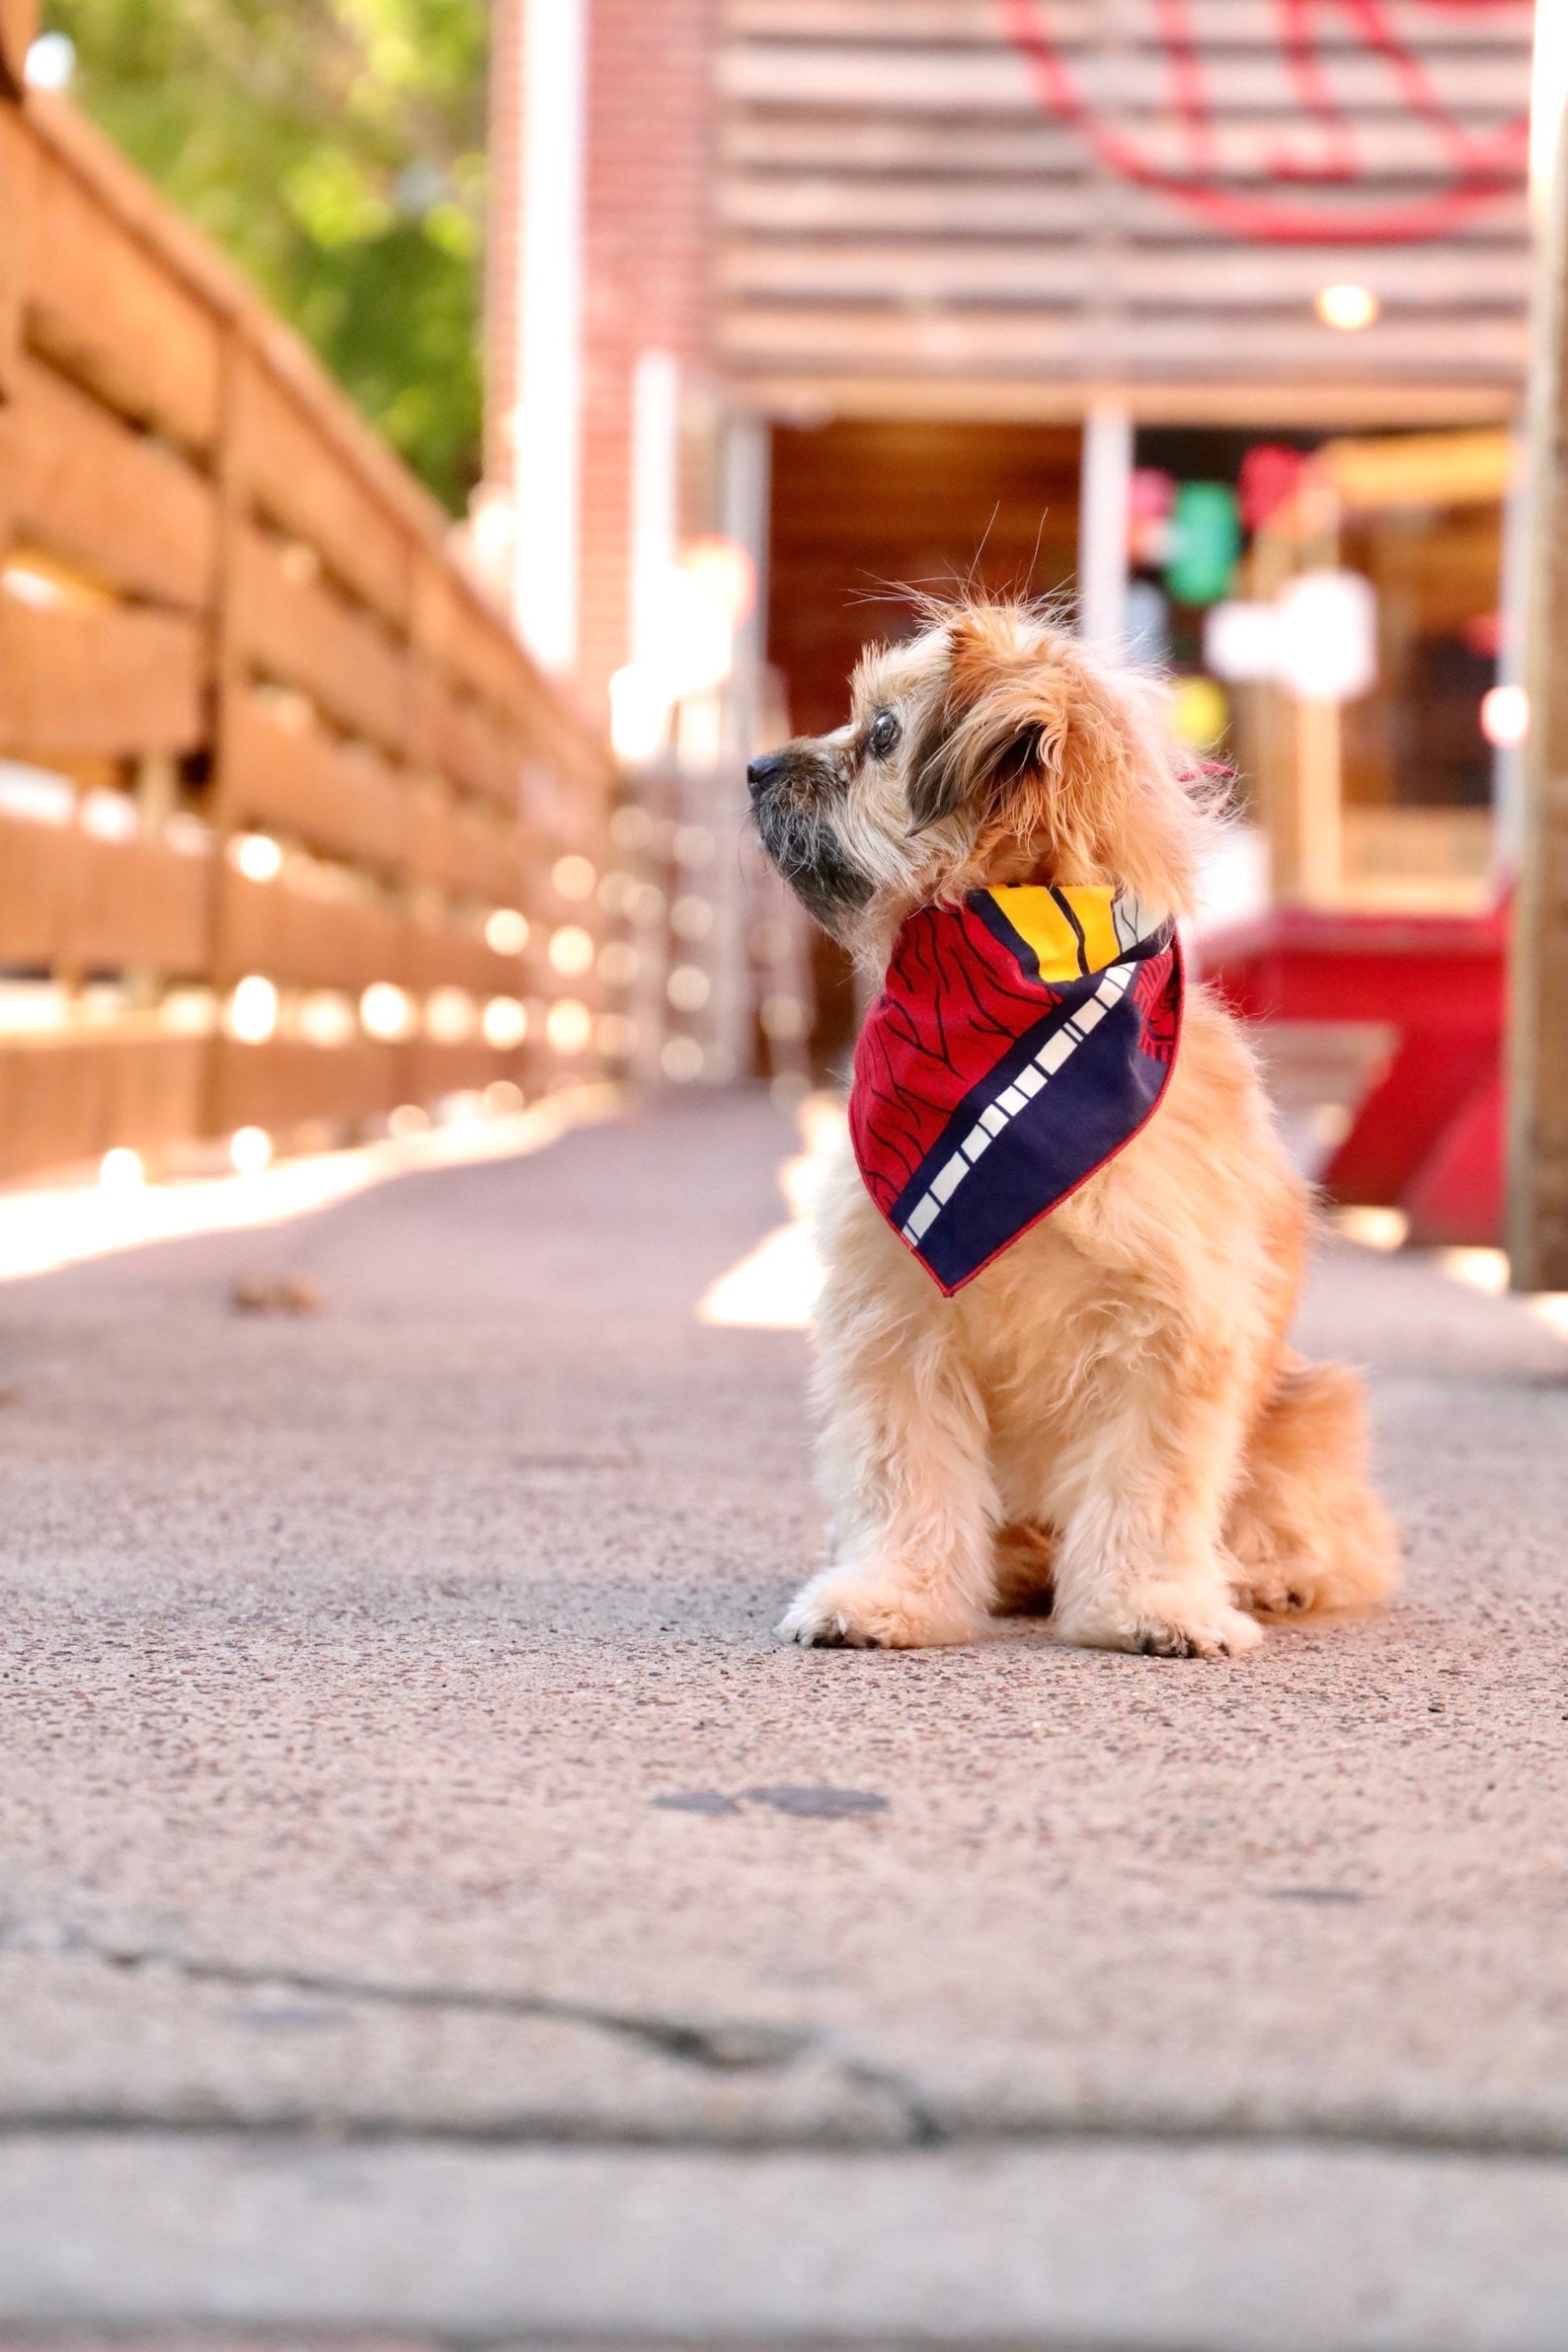 doggie wearing a colorful bandana, which is red, yellow, white, and navy blue